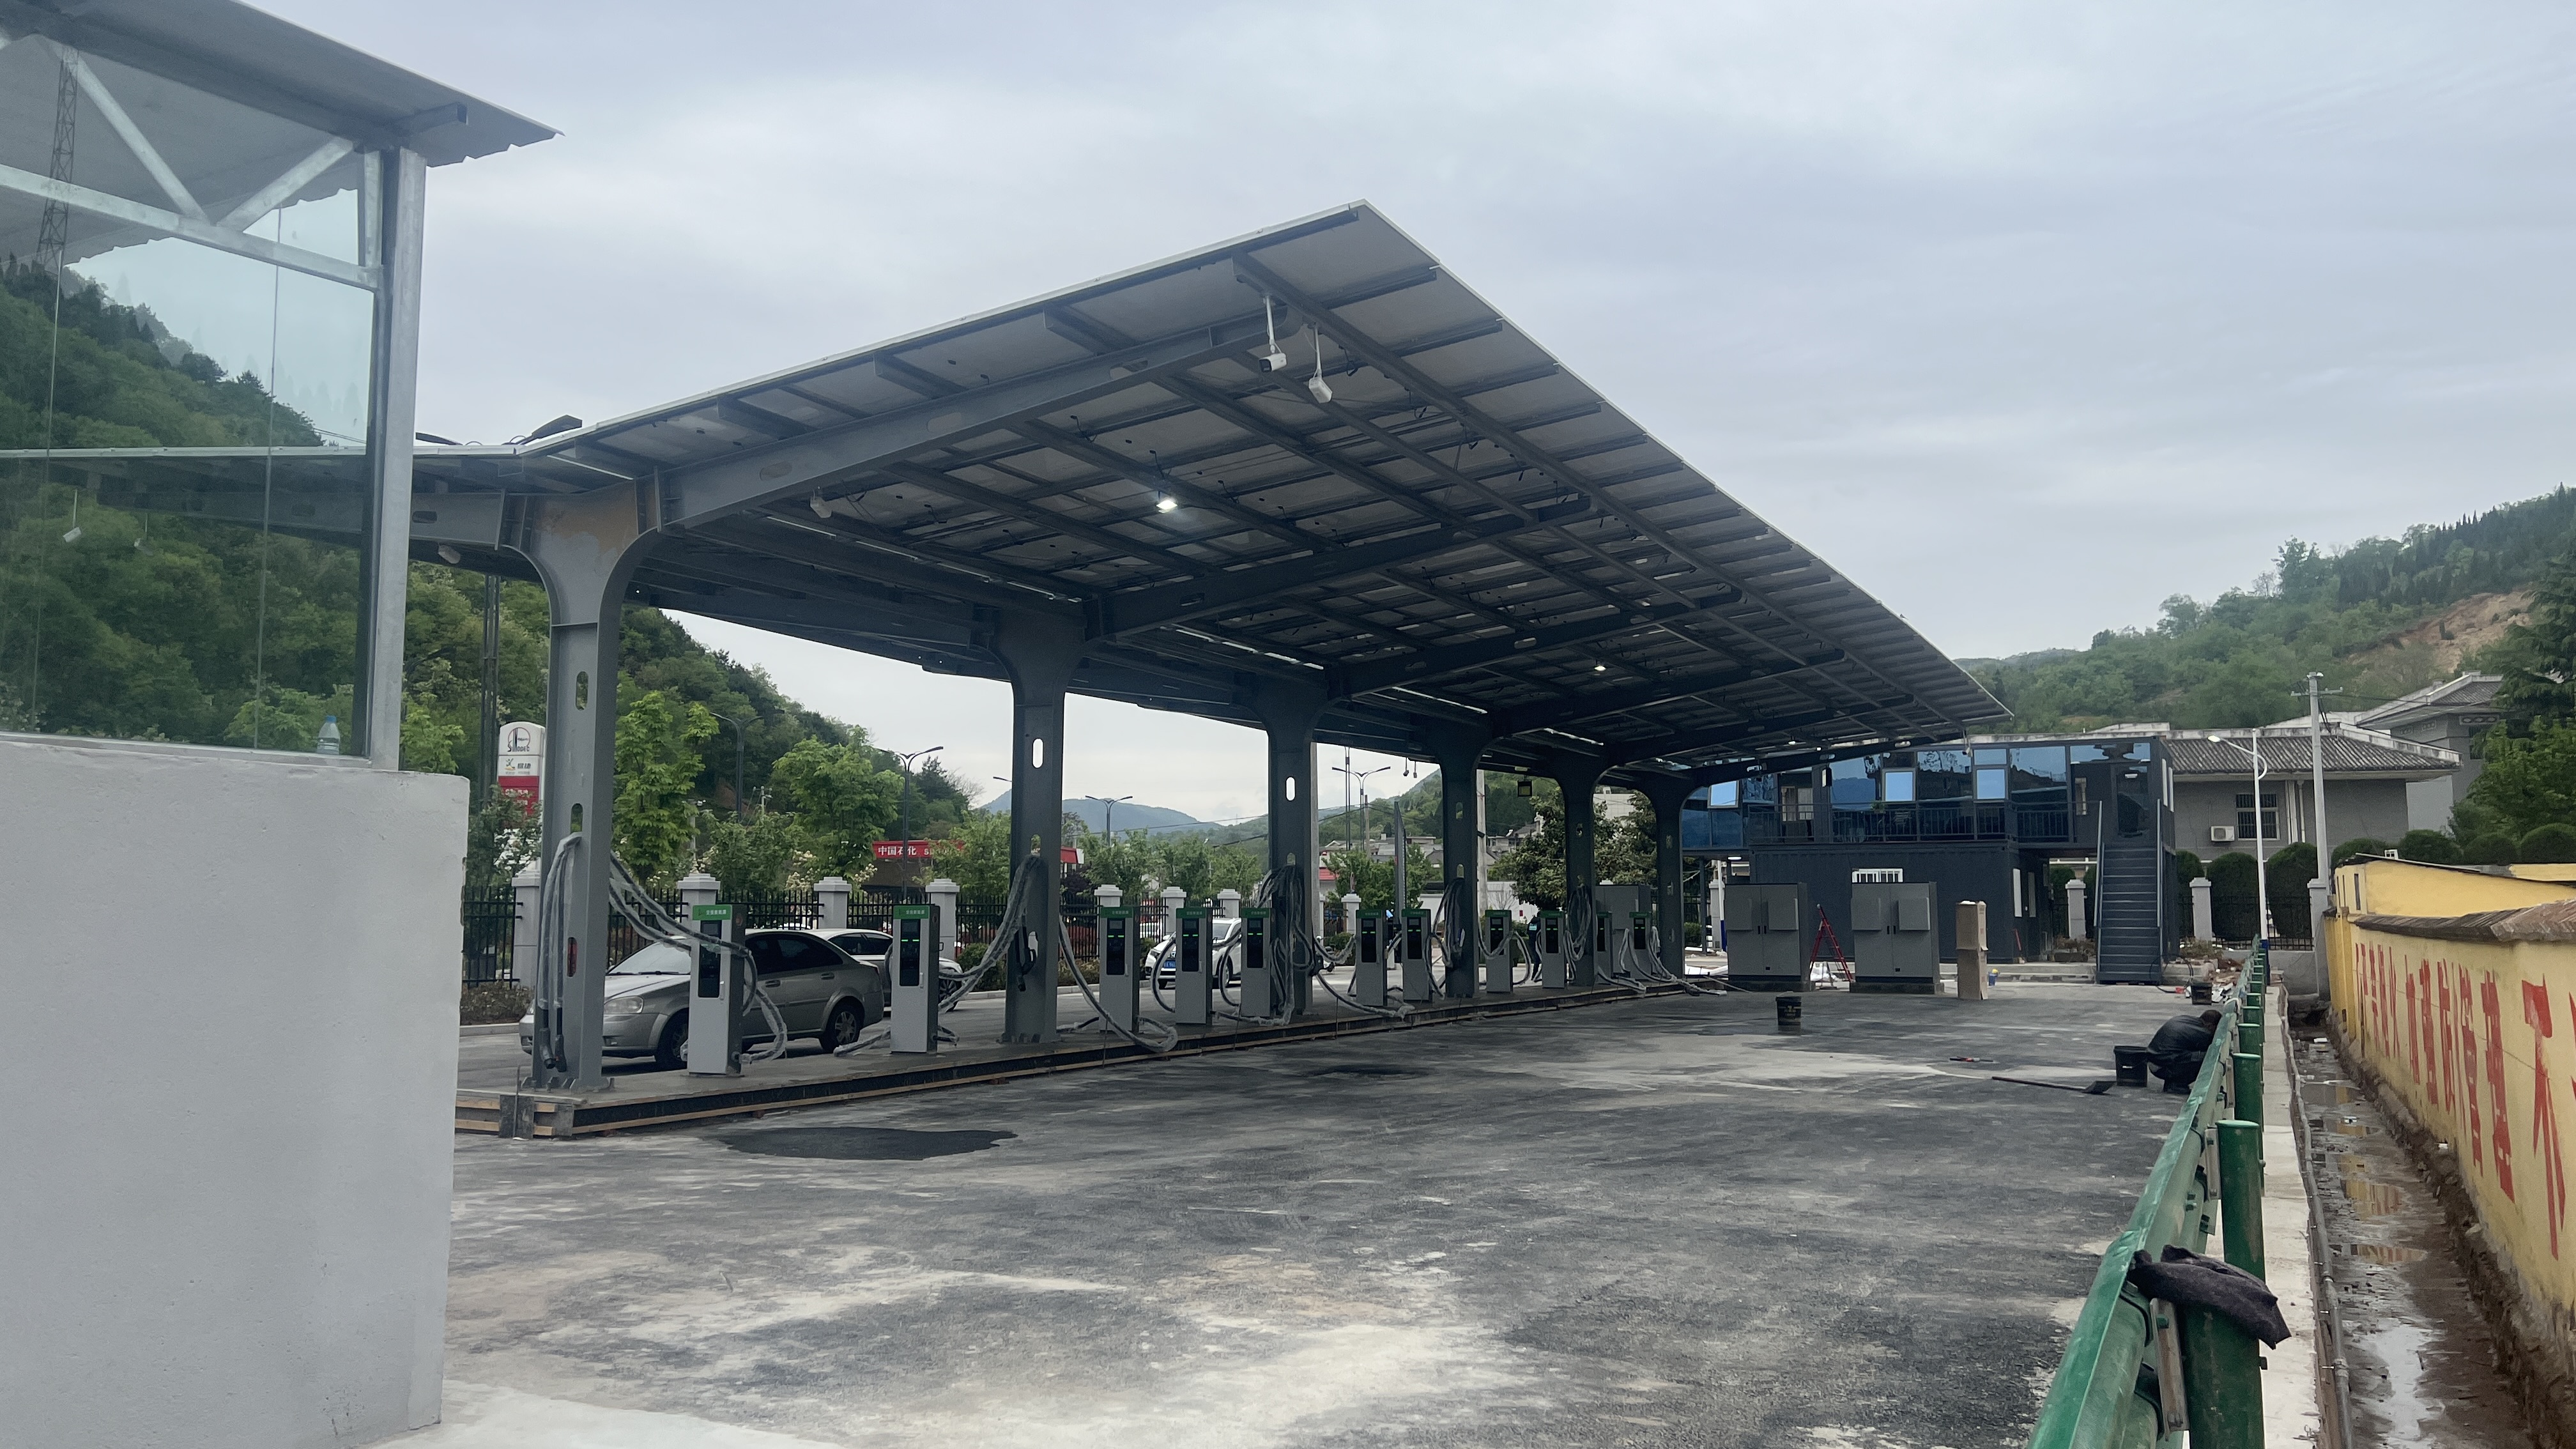 Overview of photovoltaic carport